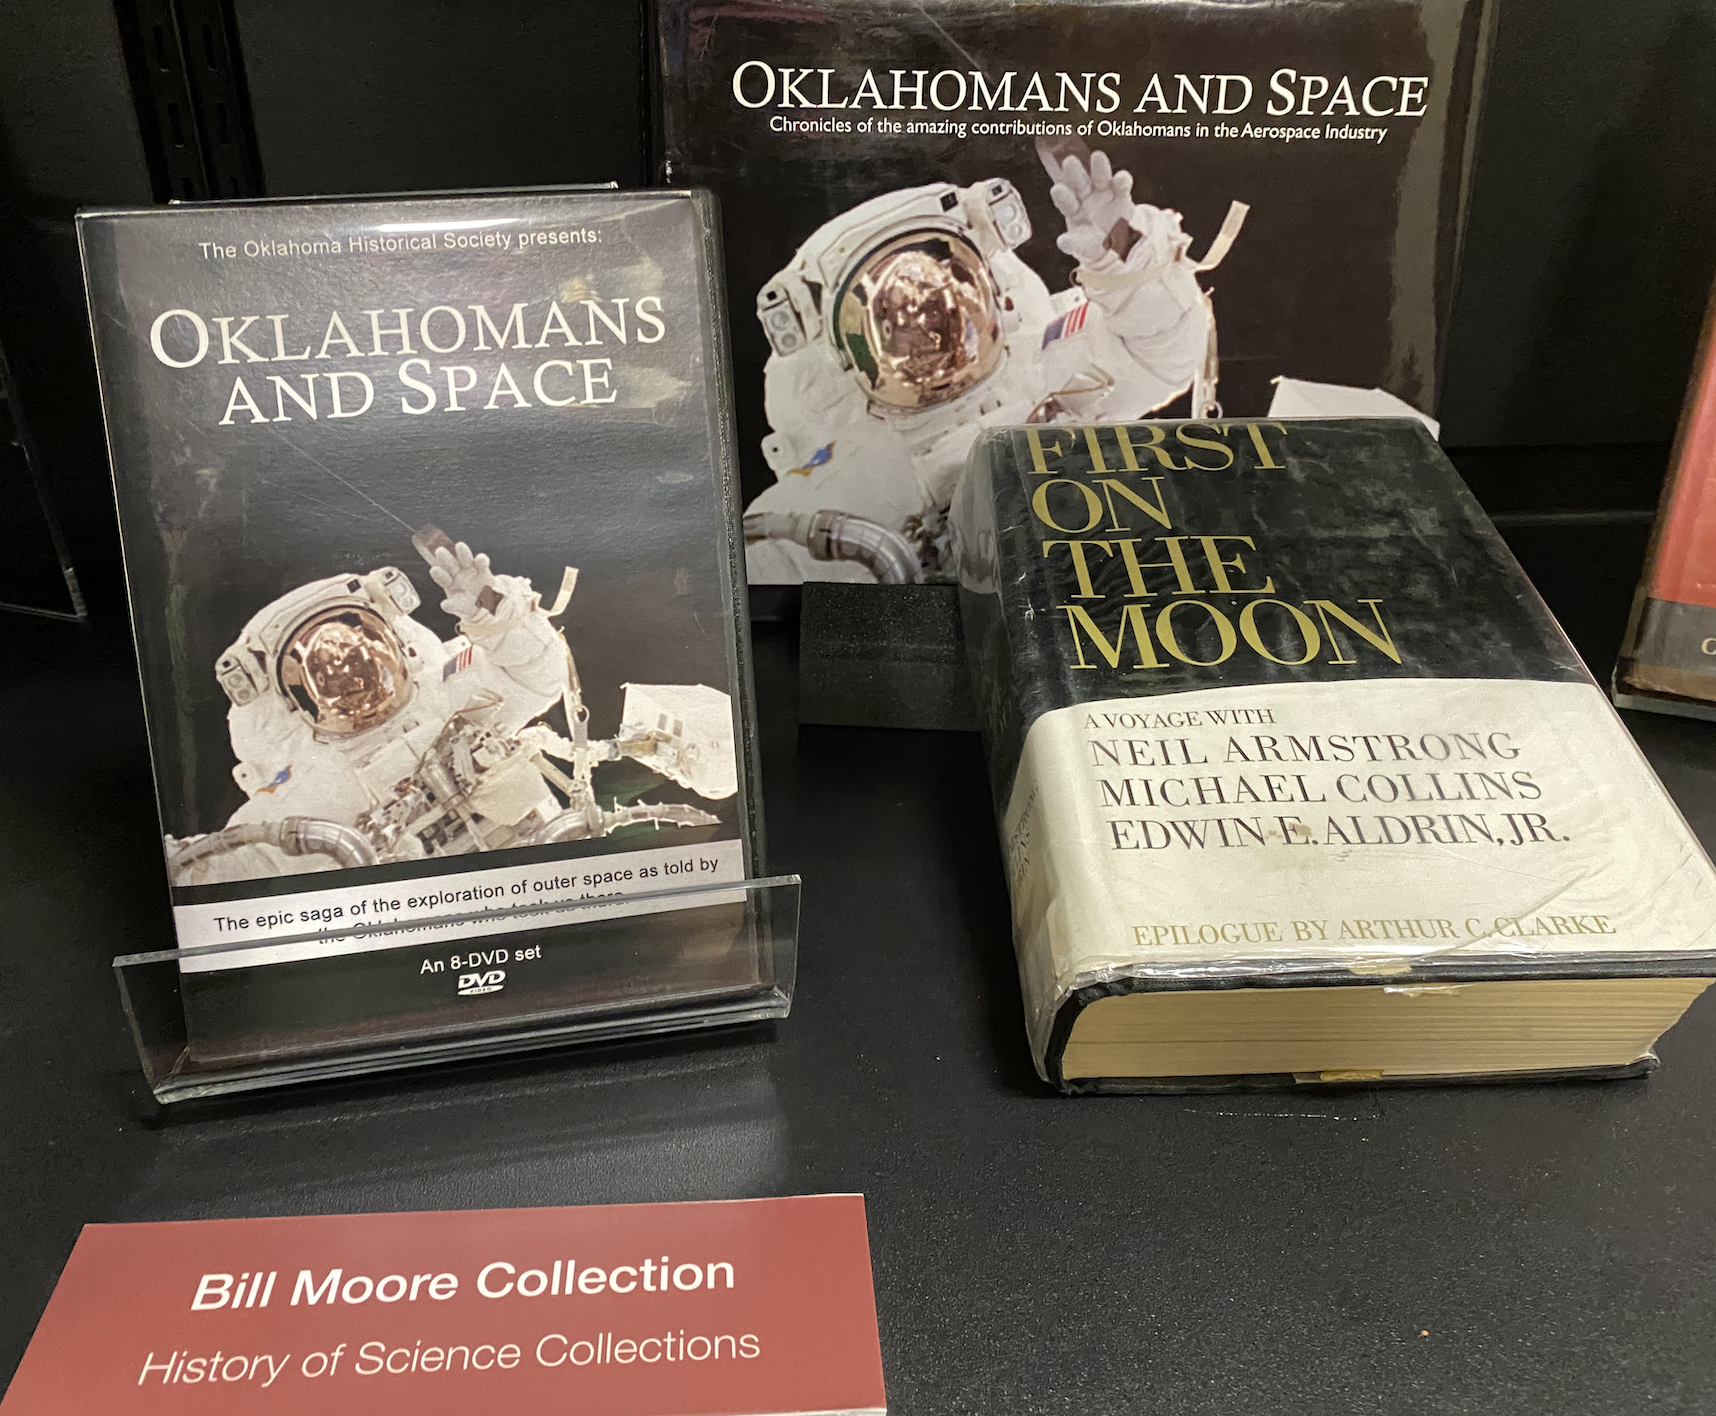 Photo of books on shelf with sign for Bill Moore Collection (includes Oklahomans and Space book & media)